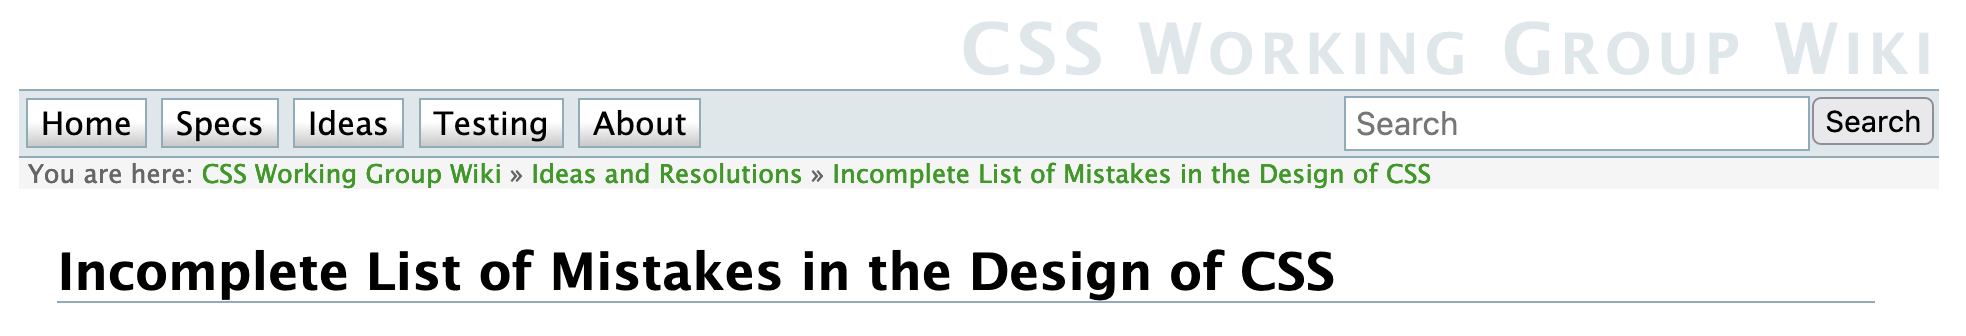 CSS working group wiki – Incomplete List of Mistakes in the Design of CSS